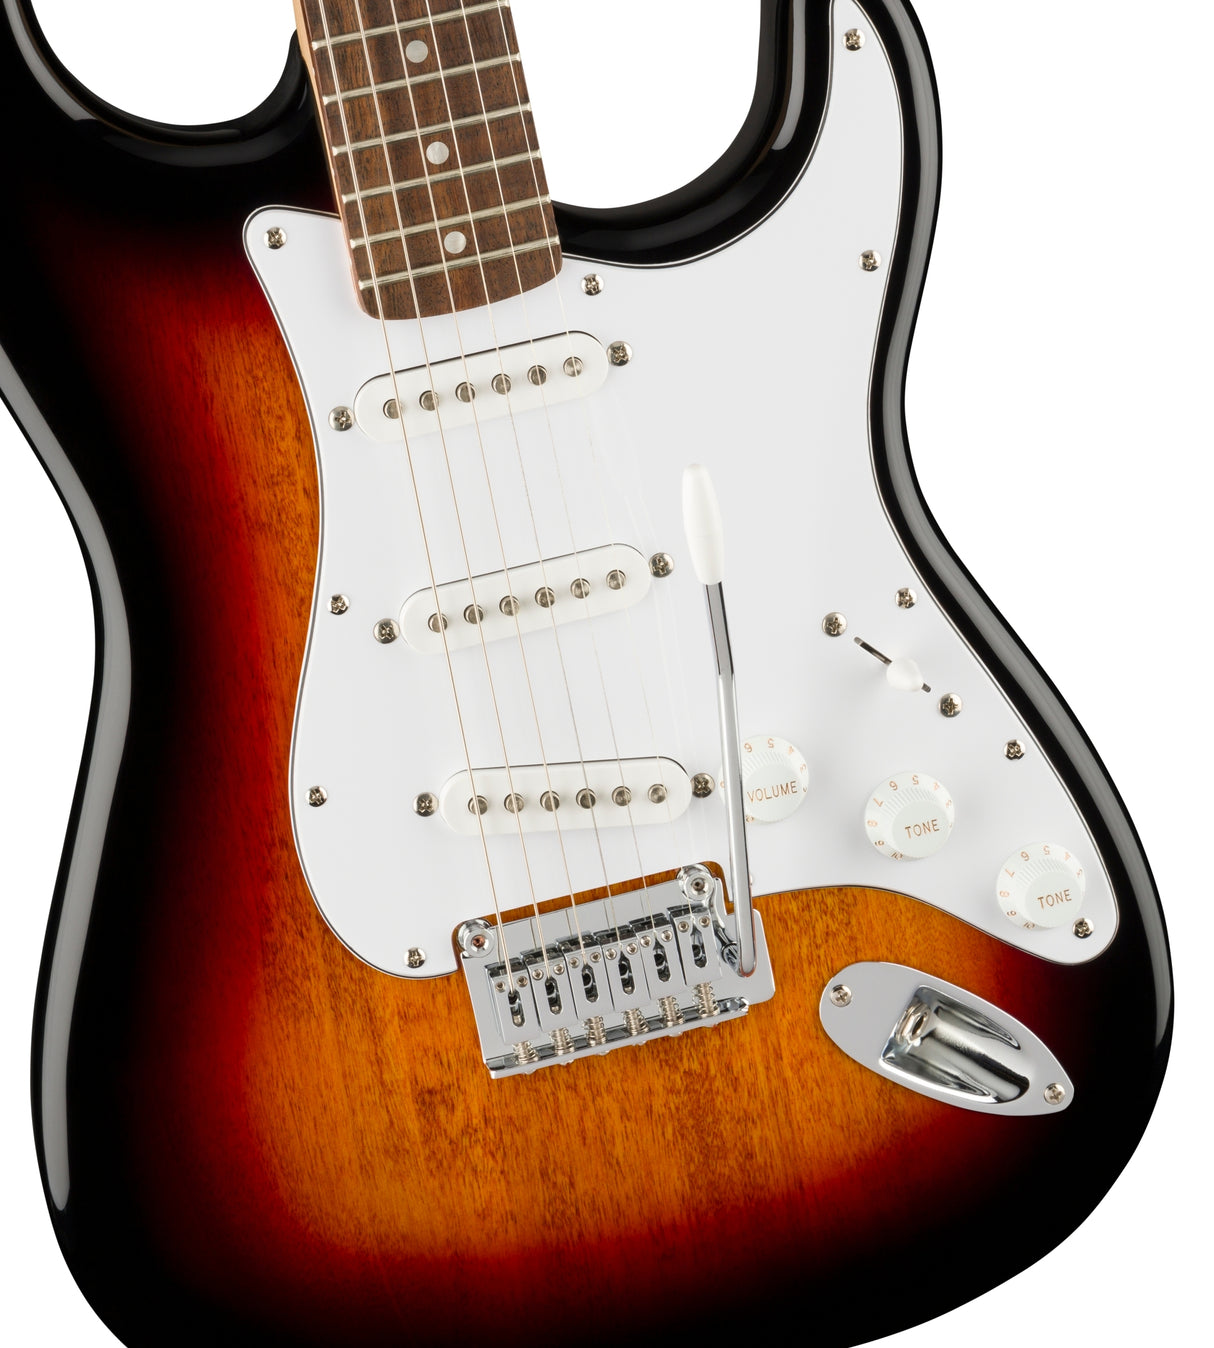 SQUIER by Fender Affinity Series® Stratocaster® Electric Guitar